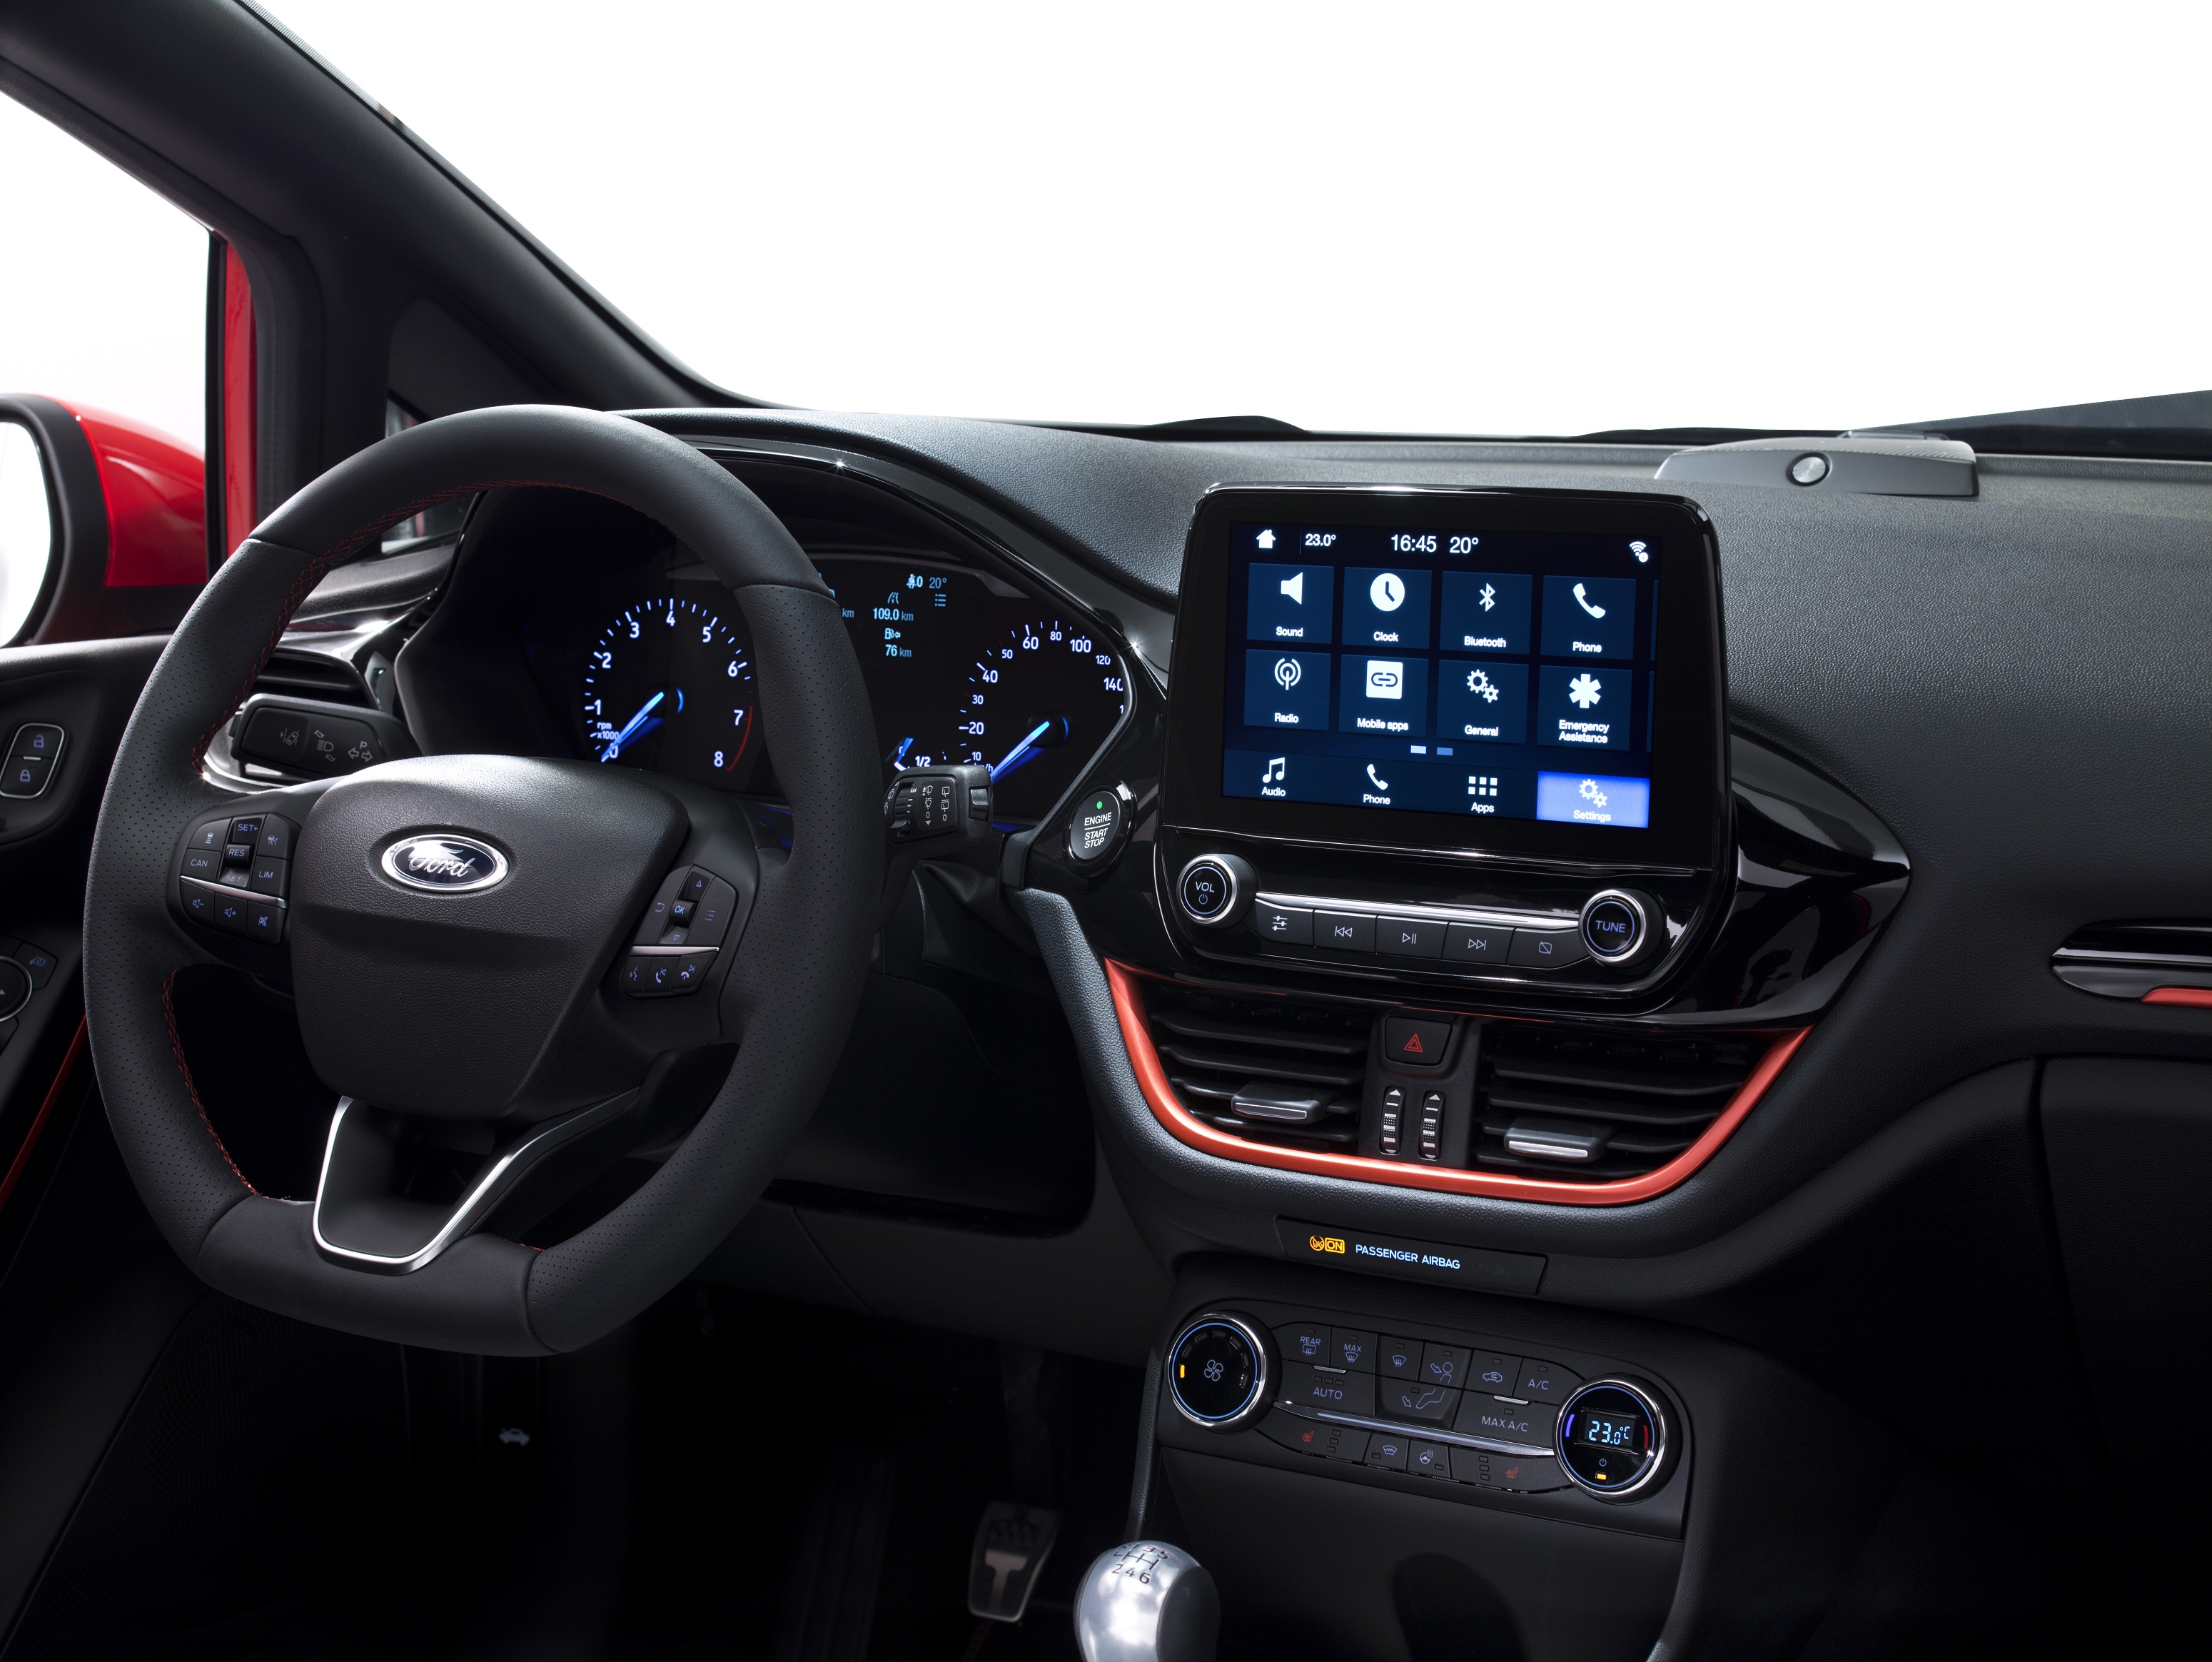 Ford Fiesta Active accessories specifications